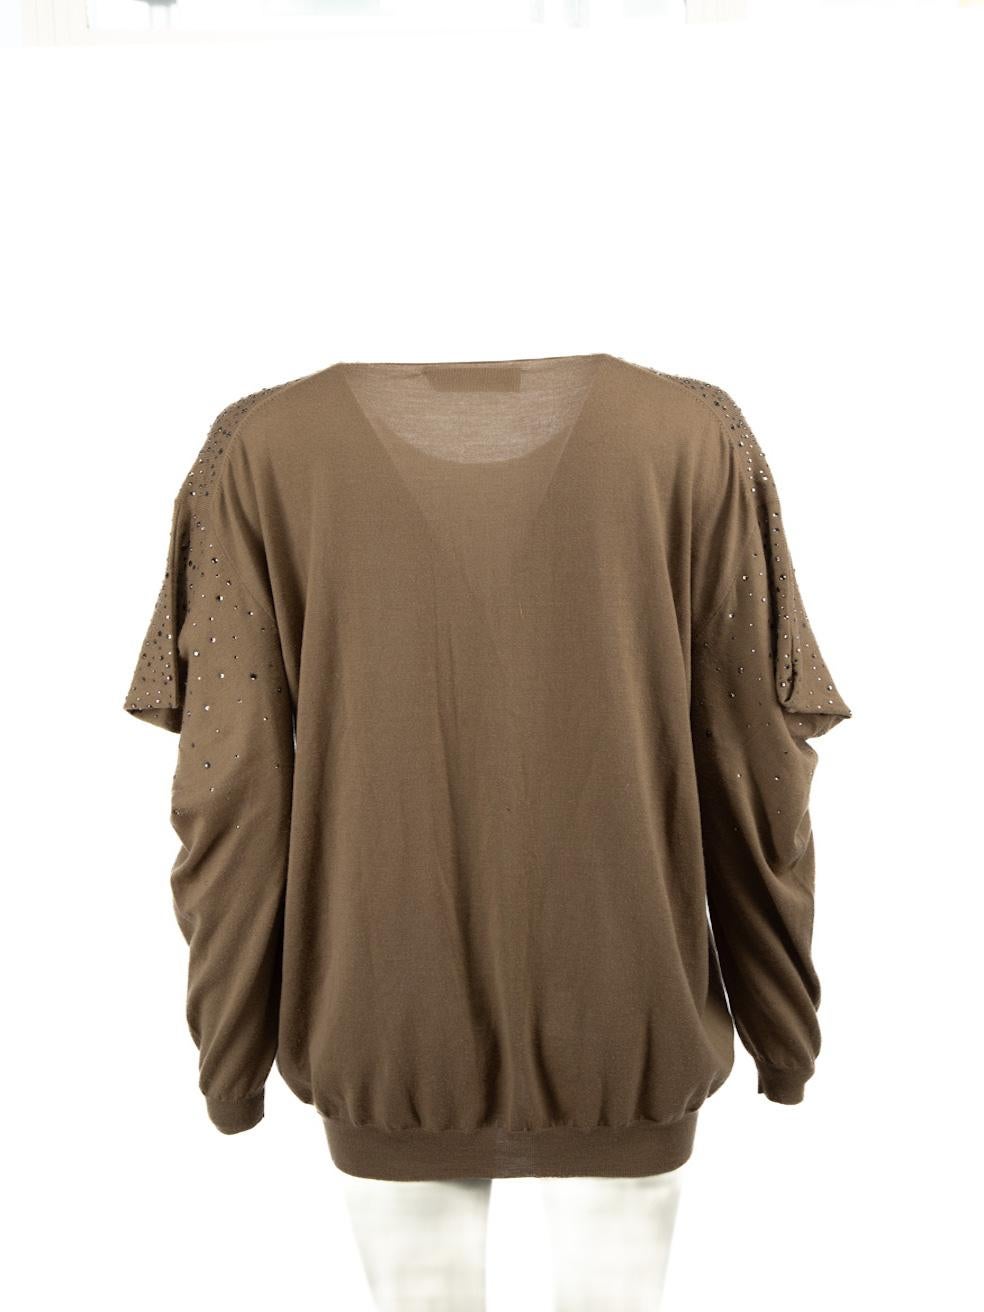 Stella McCartney Khaki Wool Embellished Sweater Size M In Excellent Condition For Sale In London, GB